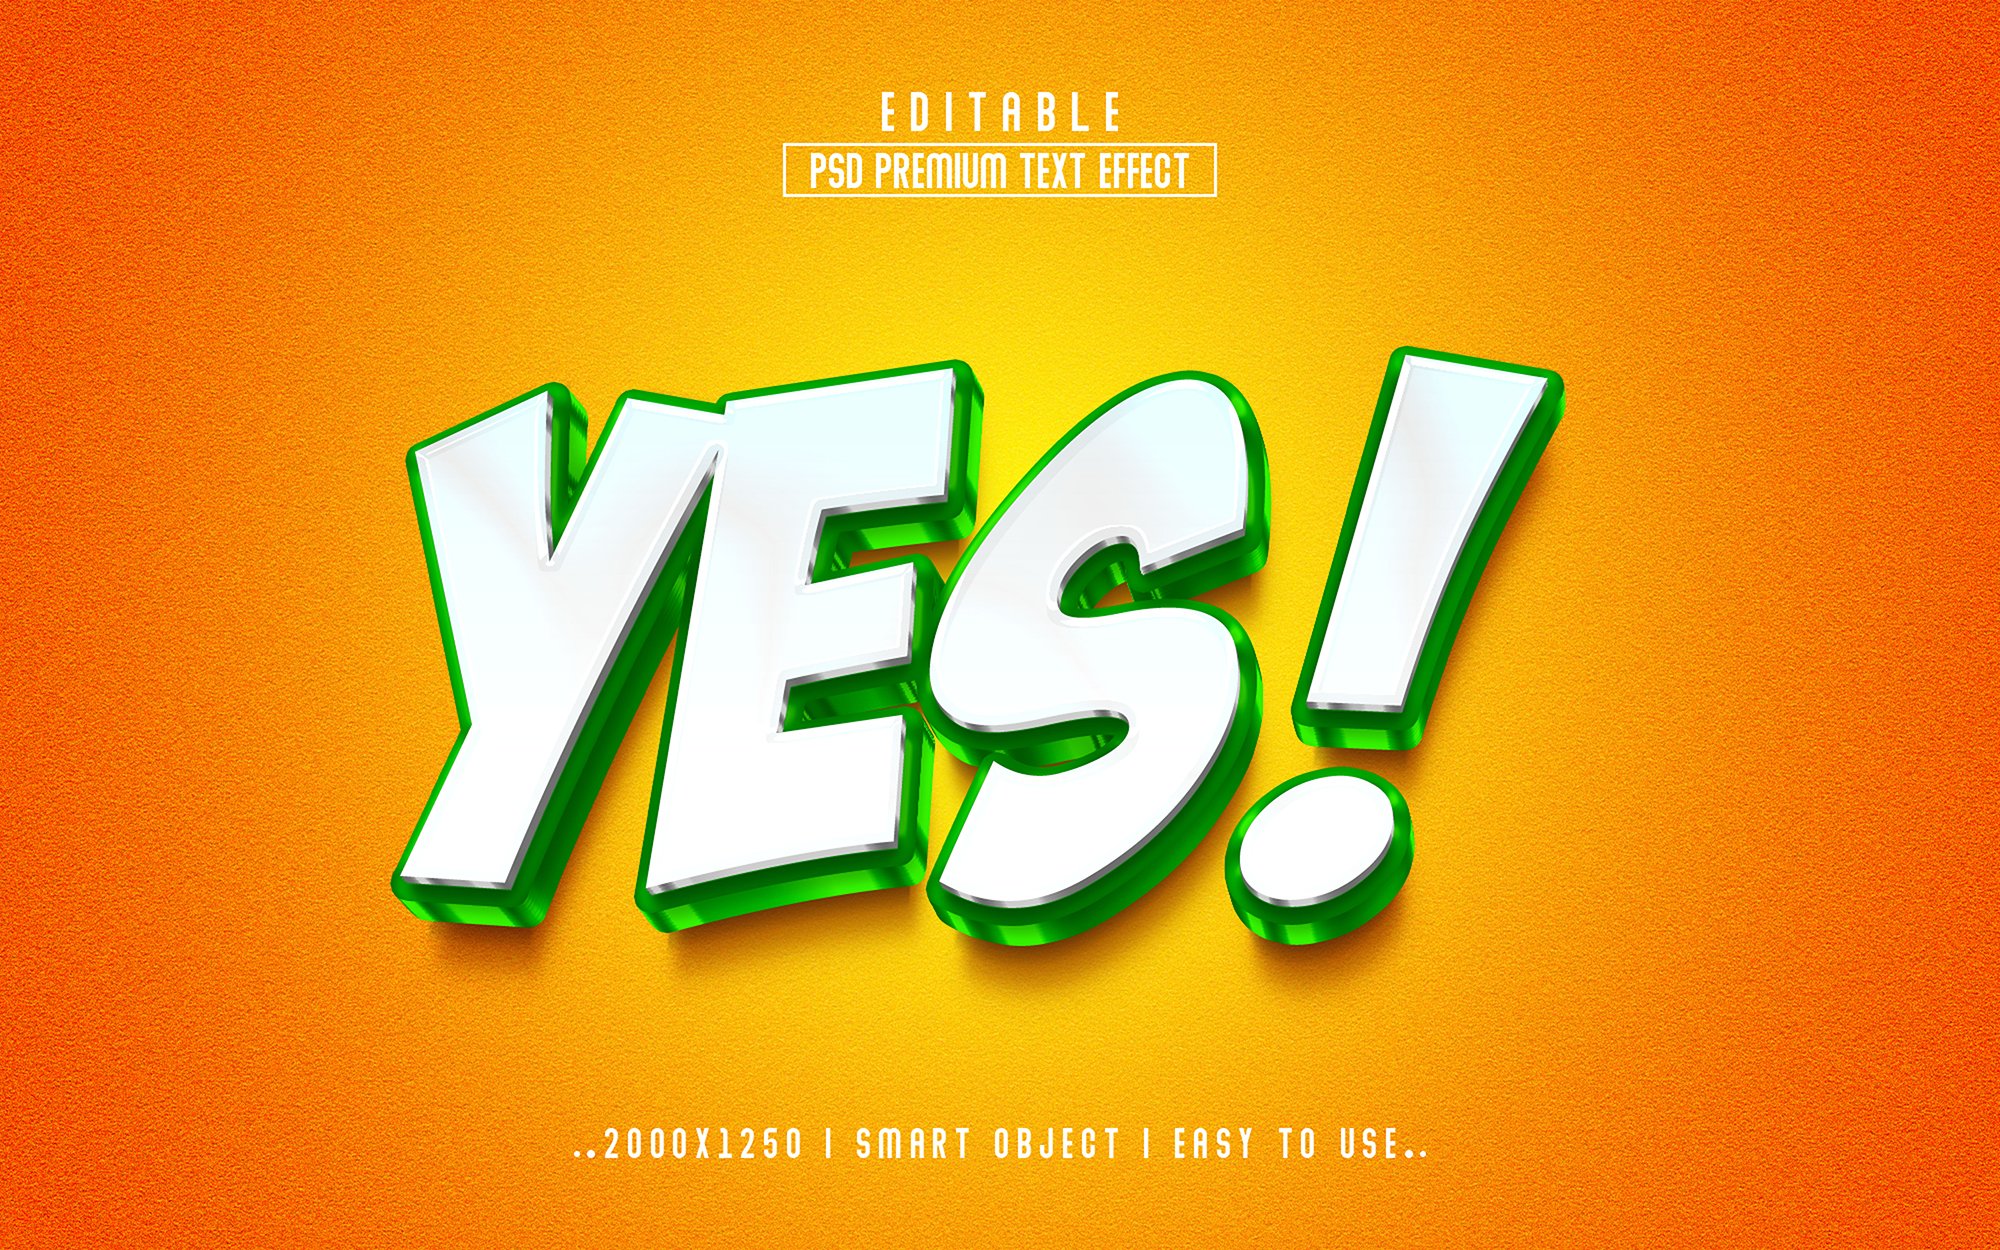 Yes 3D Editable psd Text Effectcover image.